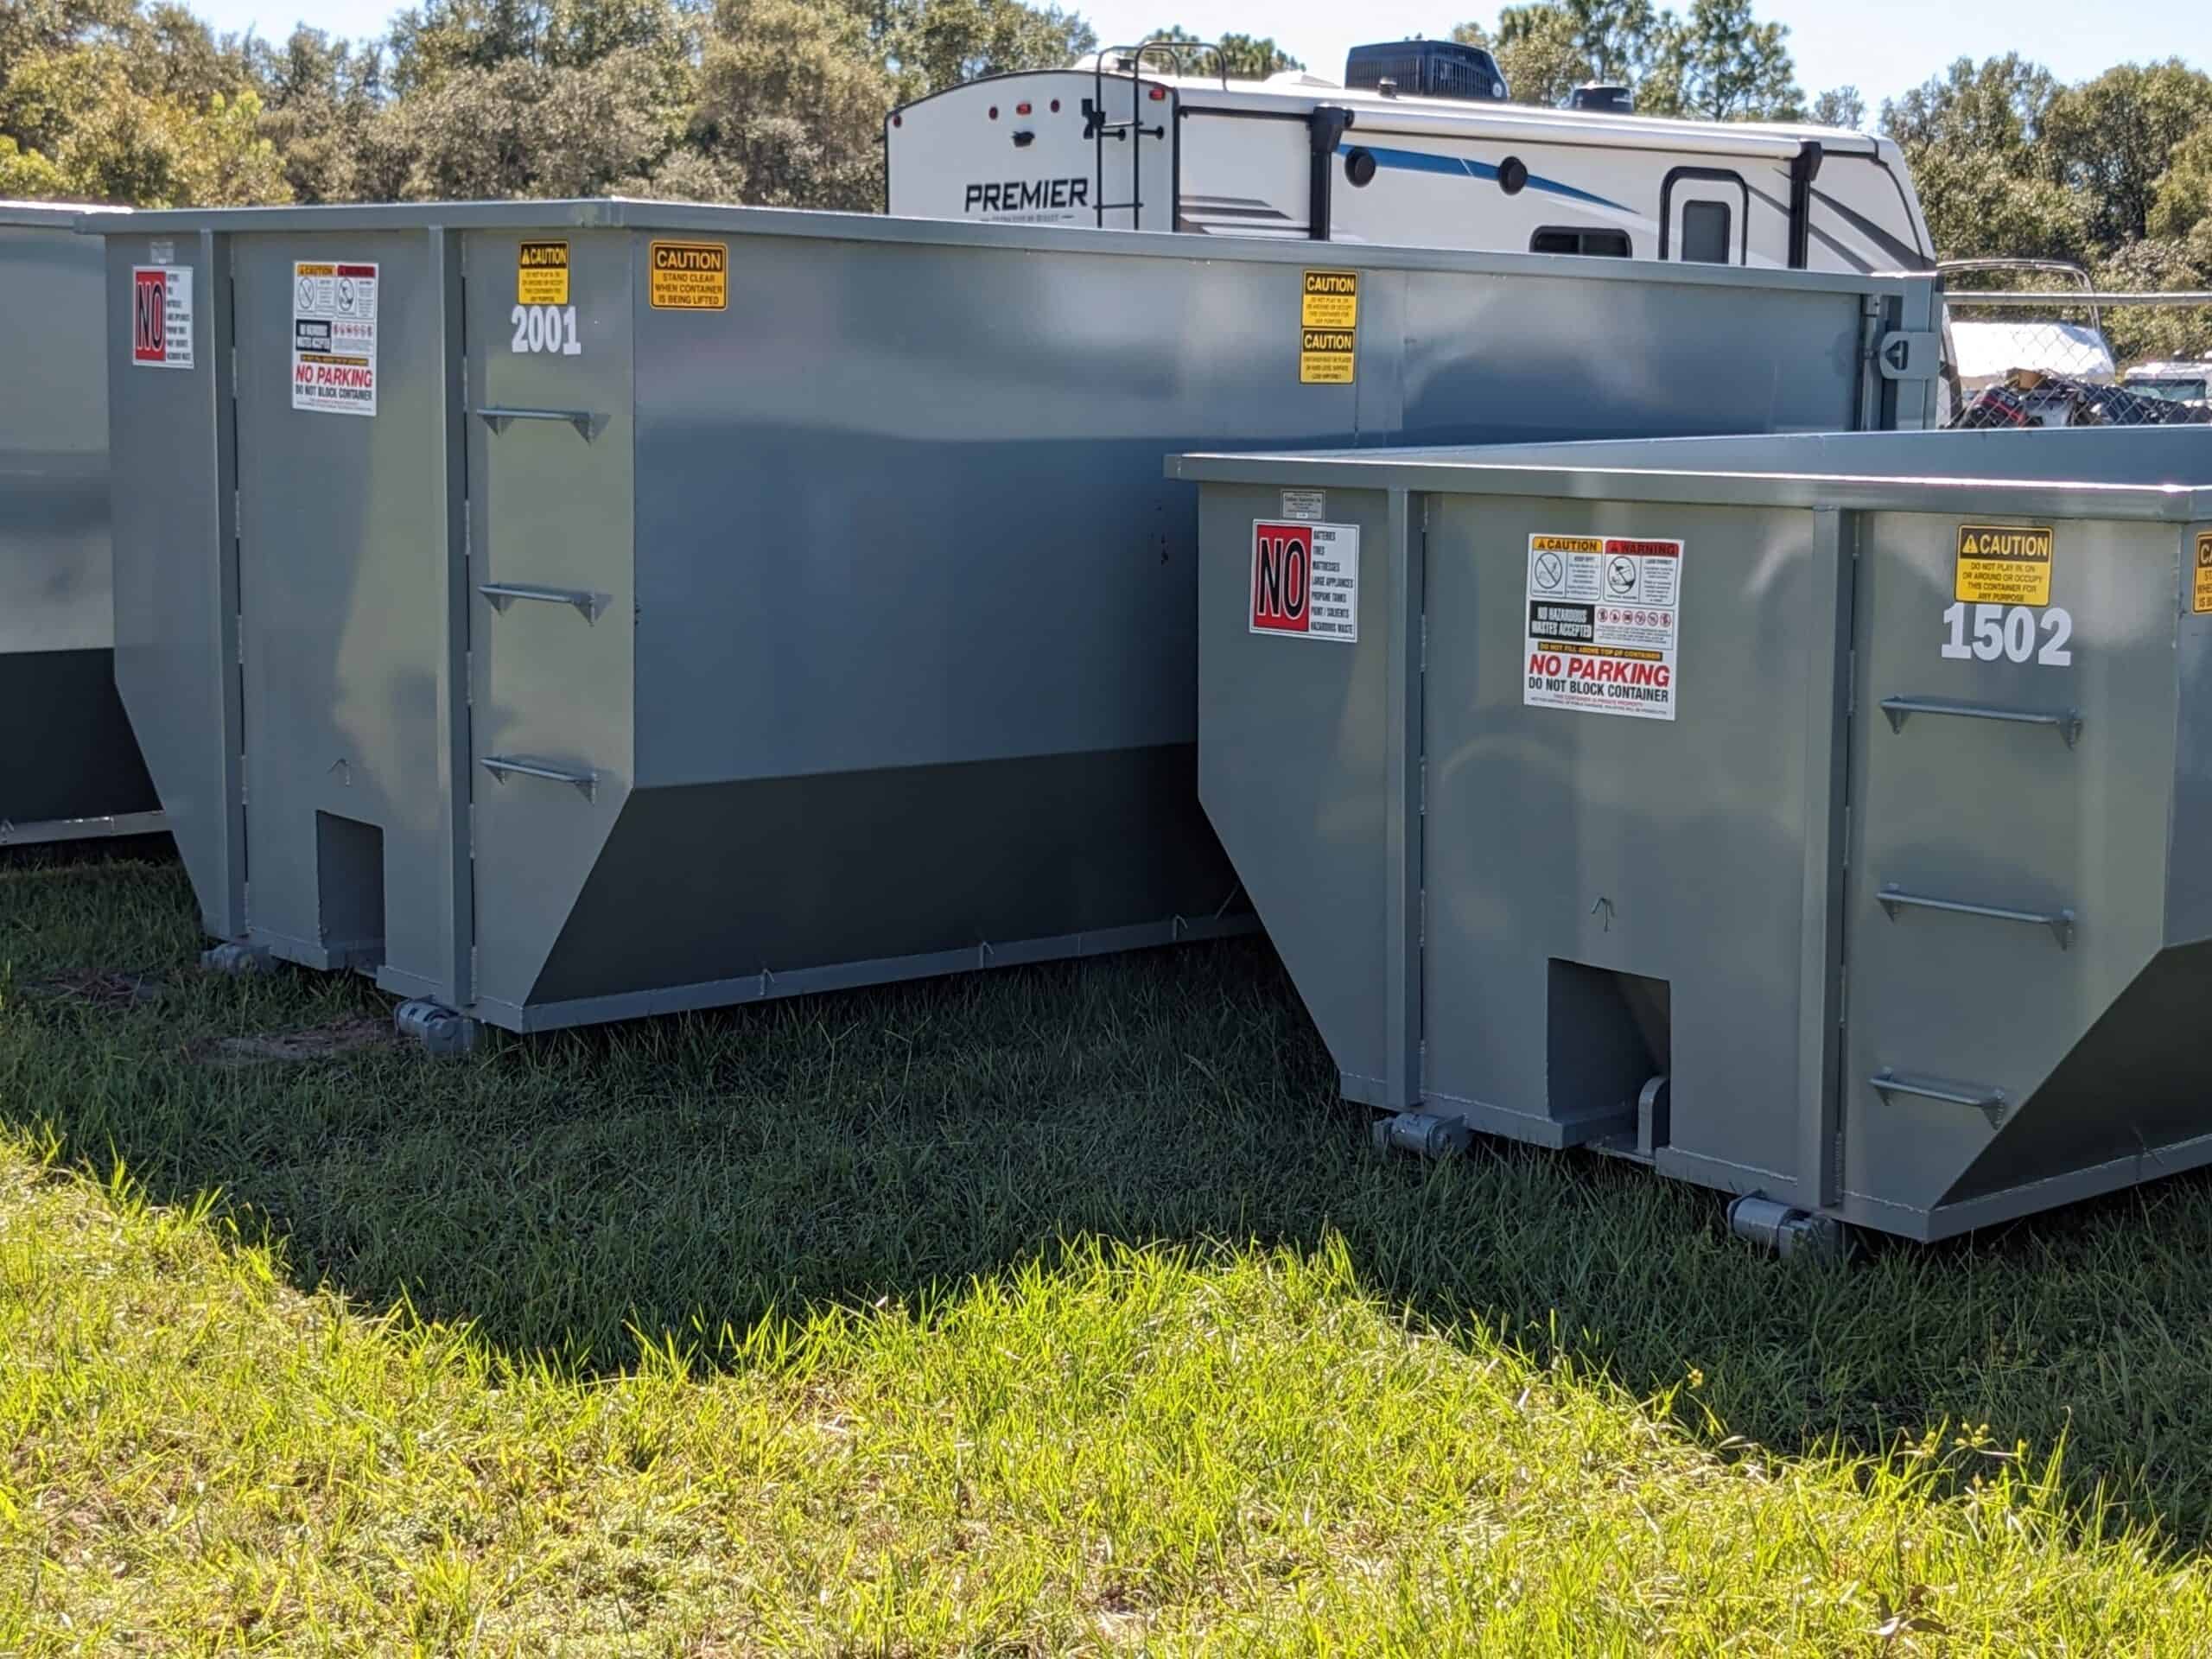 15-yard dumpsters for waste management solutions by Yankee Dumpsters in Apopka, FL.